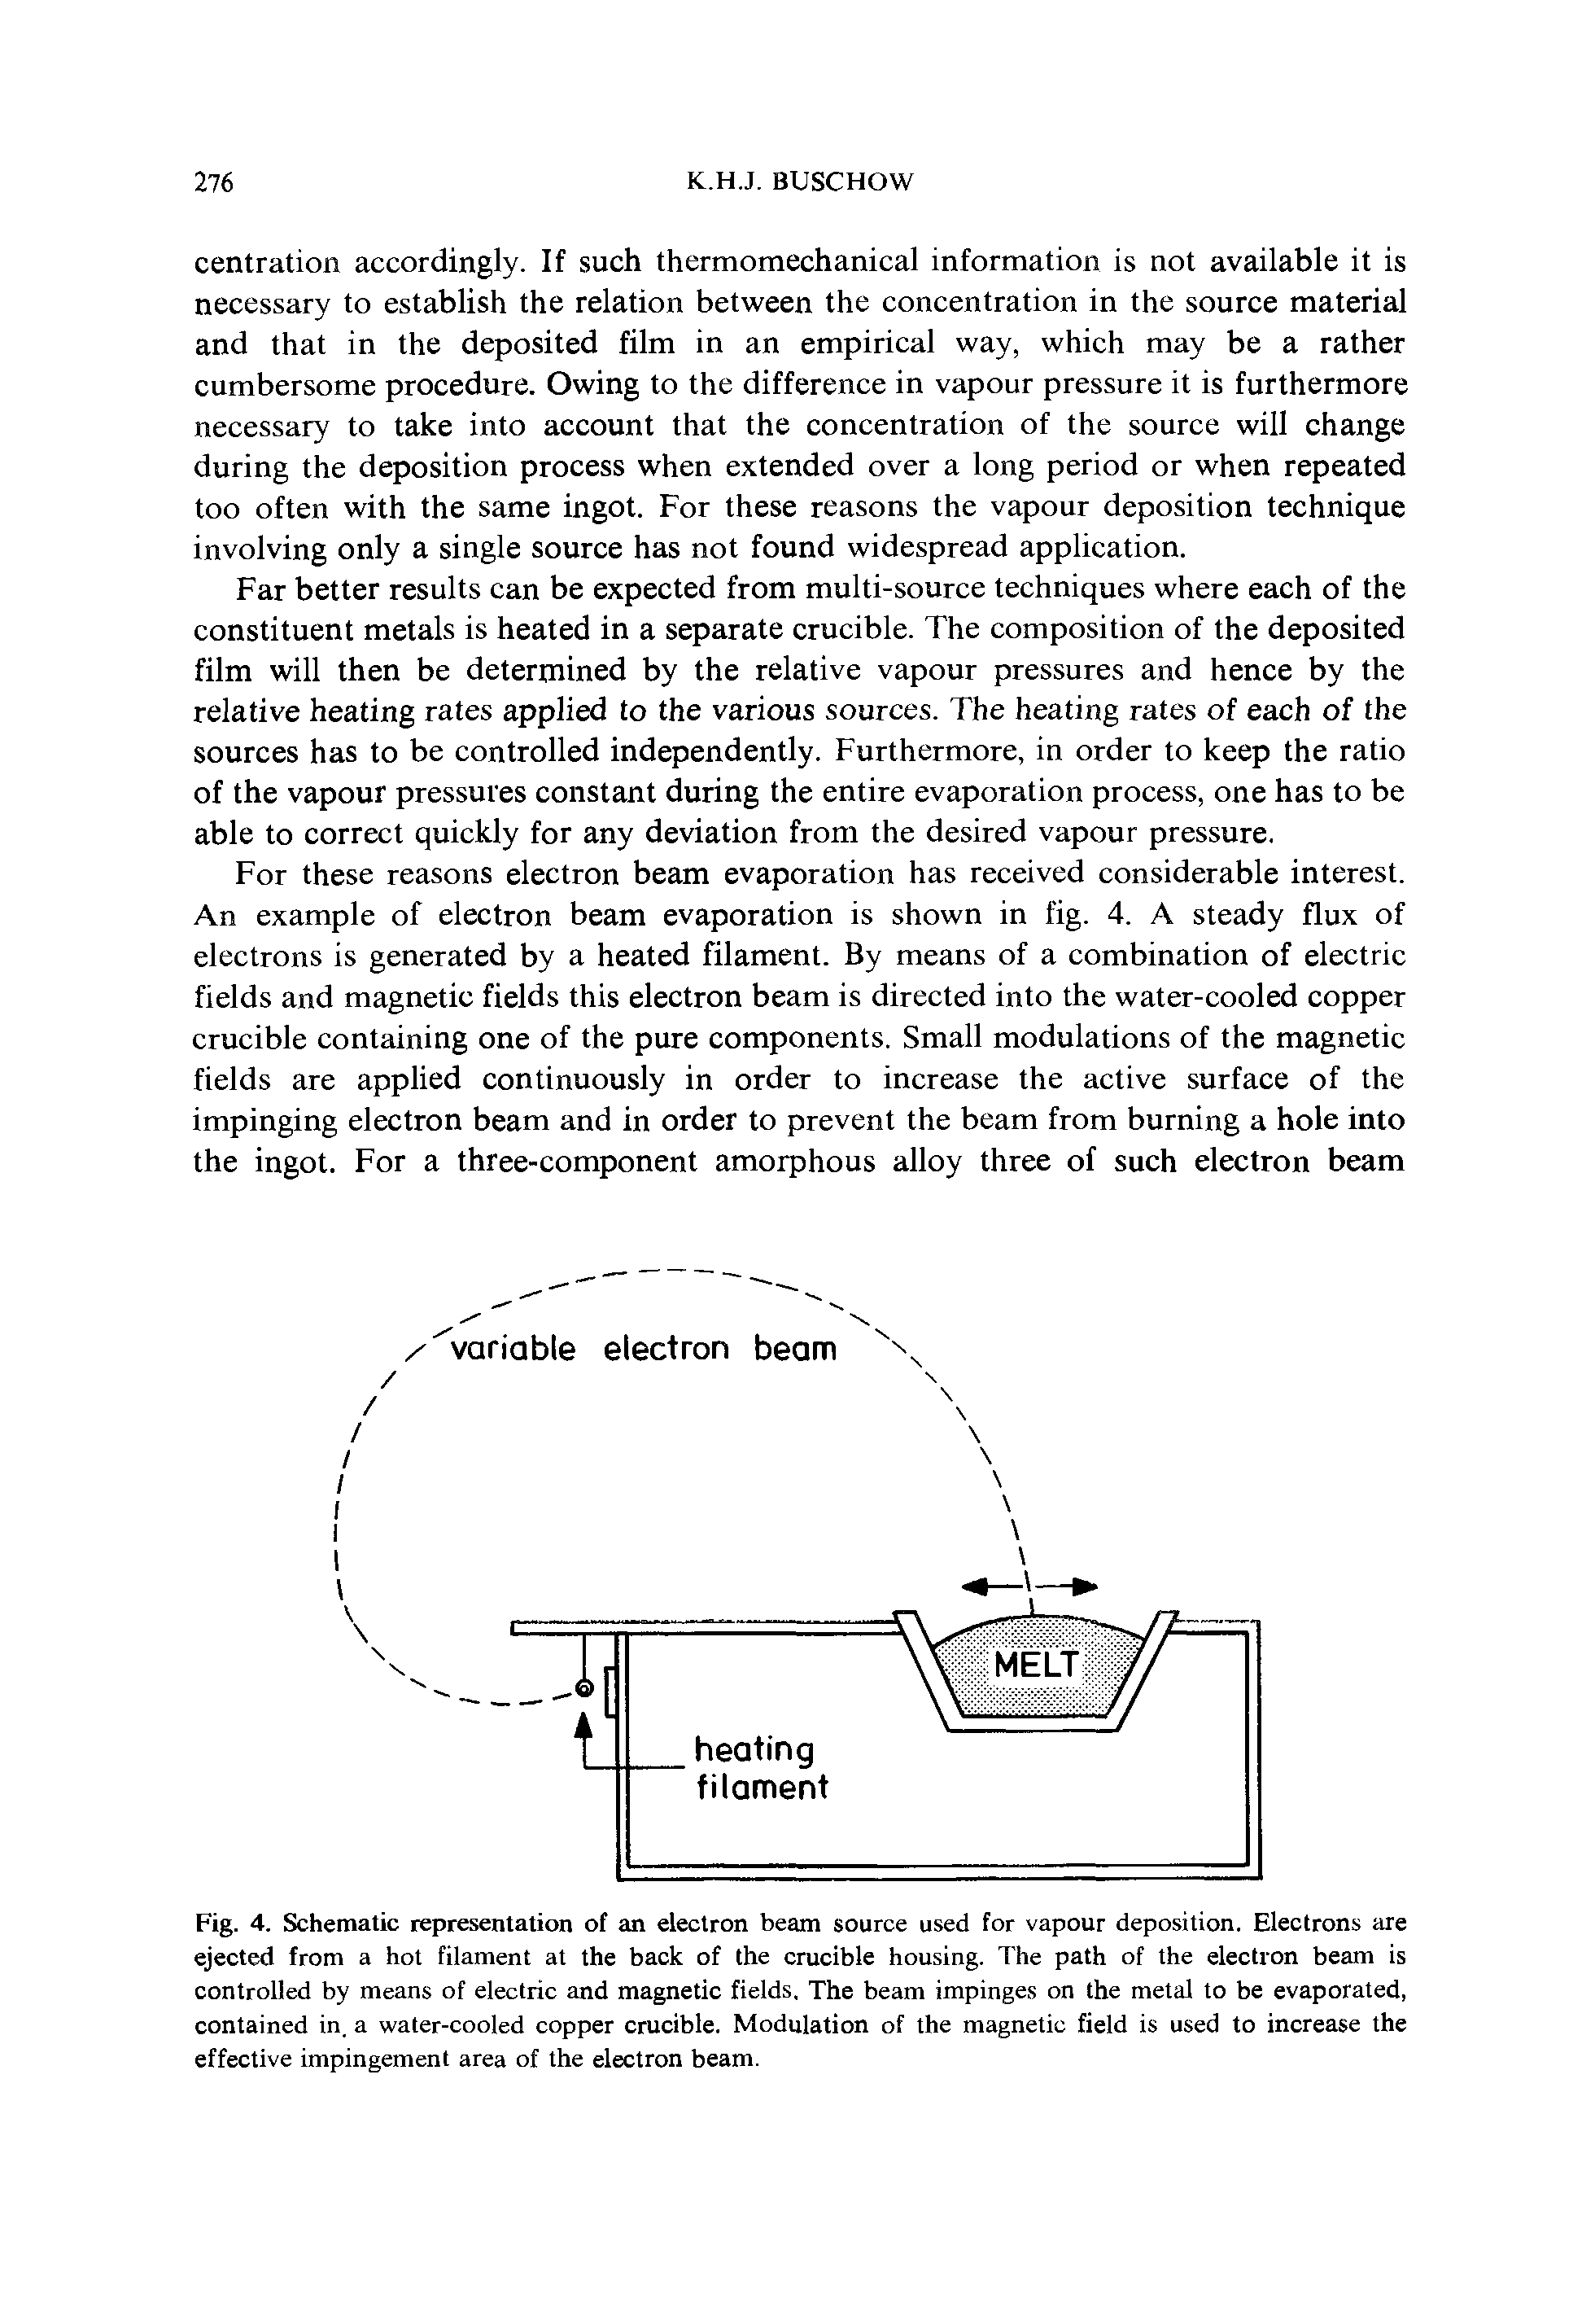 Fig. 4. Schematic representation of an electron beam source used for vapour deposition. Electrons are ejected from a hot filament at the back of the crucible housing. The path of the electron beam is controlled by means of electric and magnetic fields. The beam impinges on the metal to be evaporated, contained in. a water-cooled copper crucible. Modulation of the magnetic field is used to increase the effective impingement area of the electron beam.